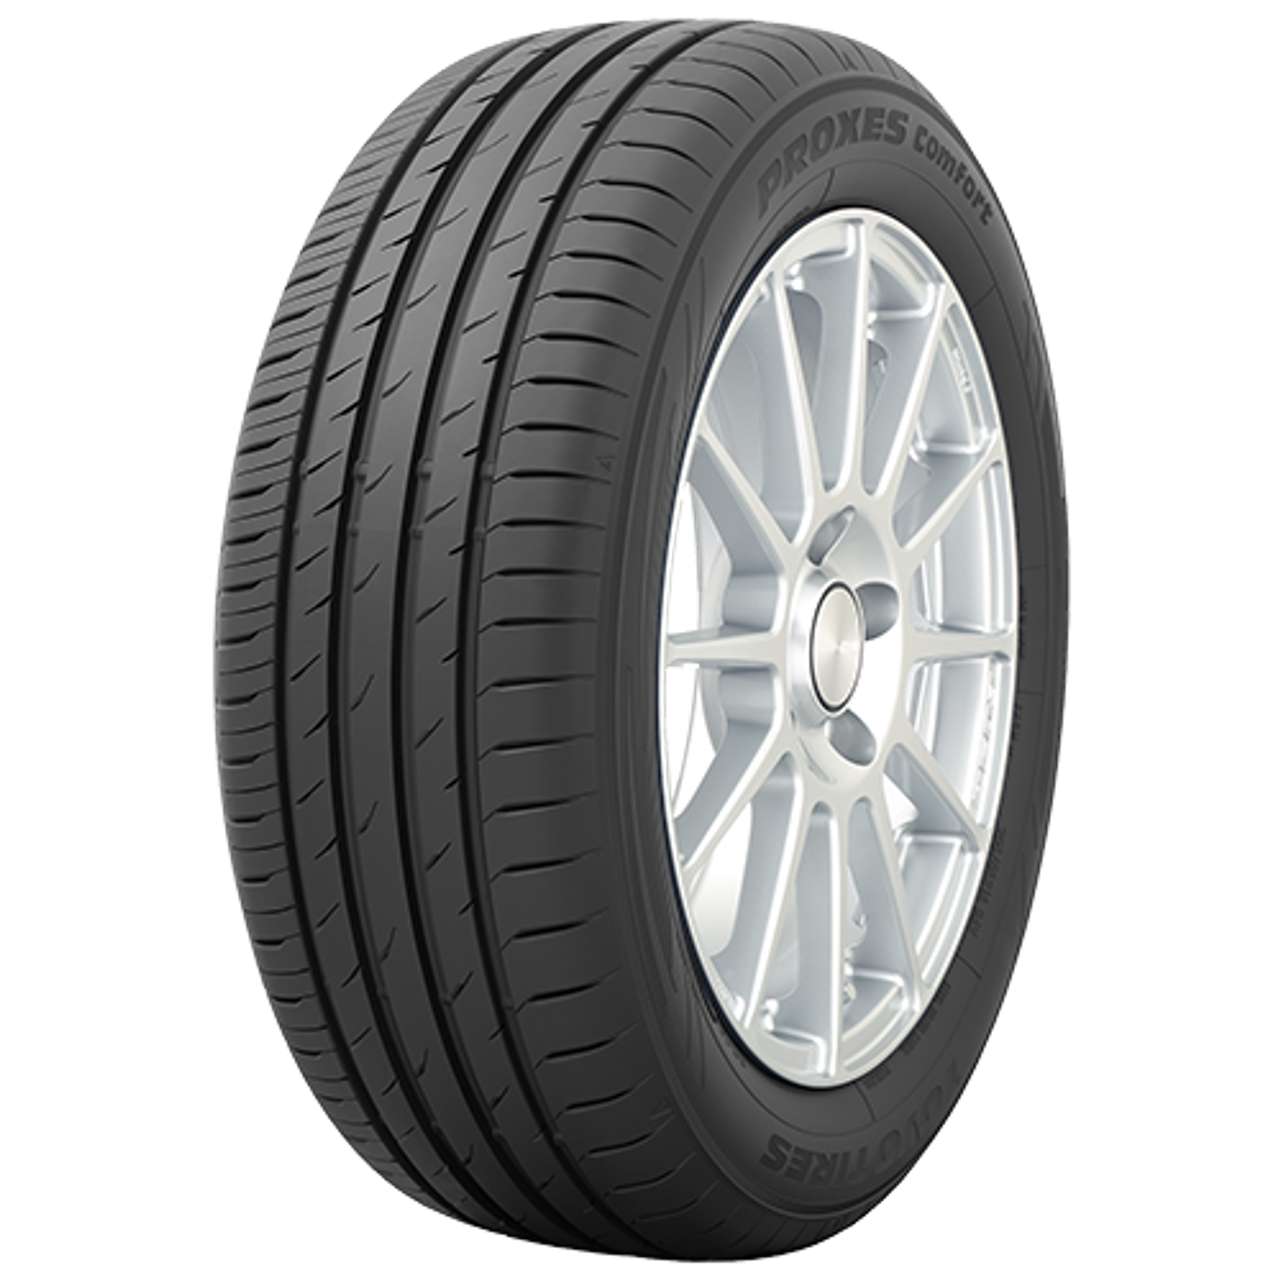 TOYO PROXES COMFORT 225/45R17 94V BSW